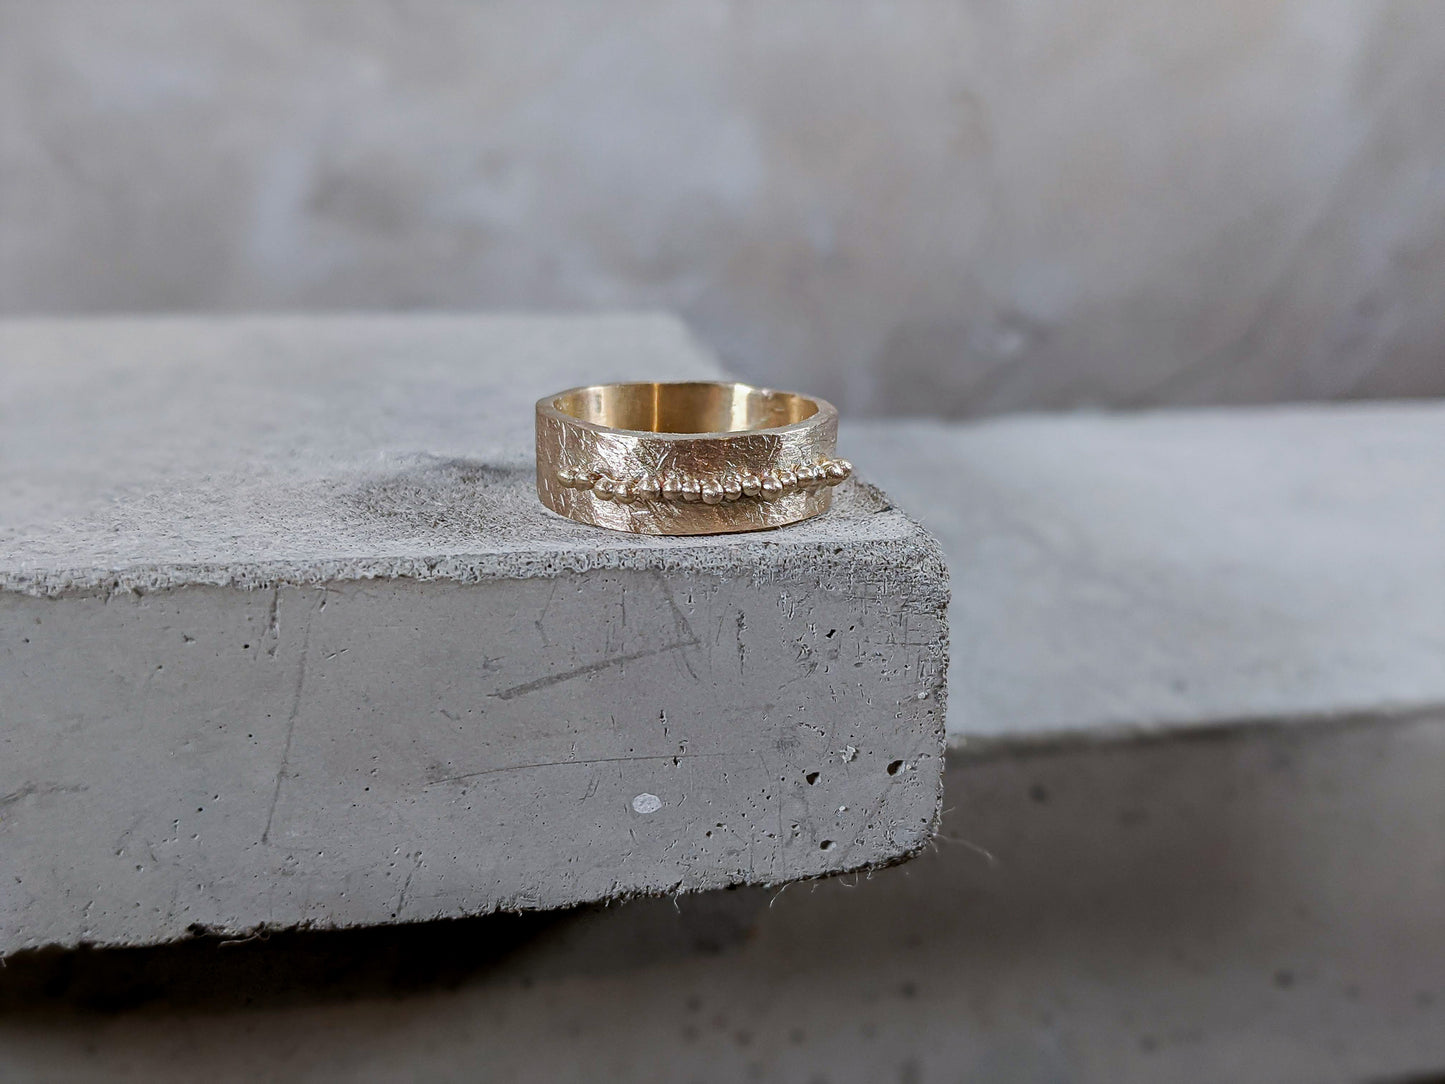 The Granulation 'Strata' Ring - Milly Maunder Designs